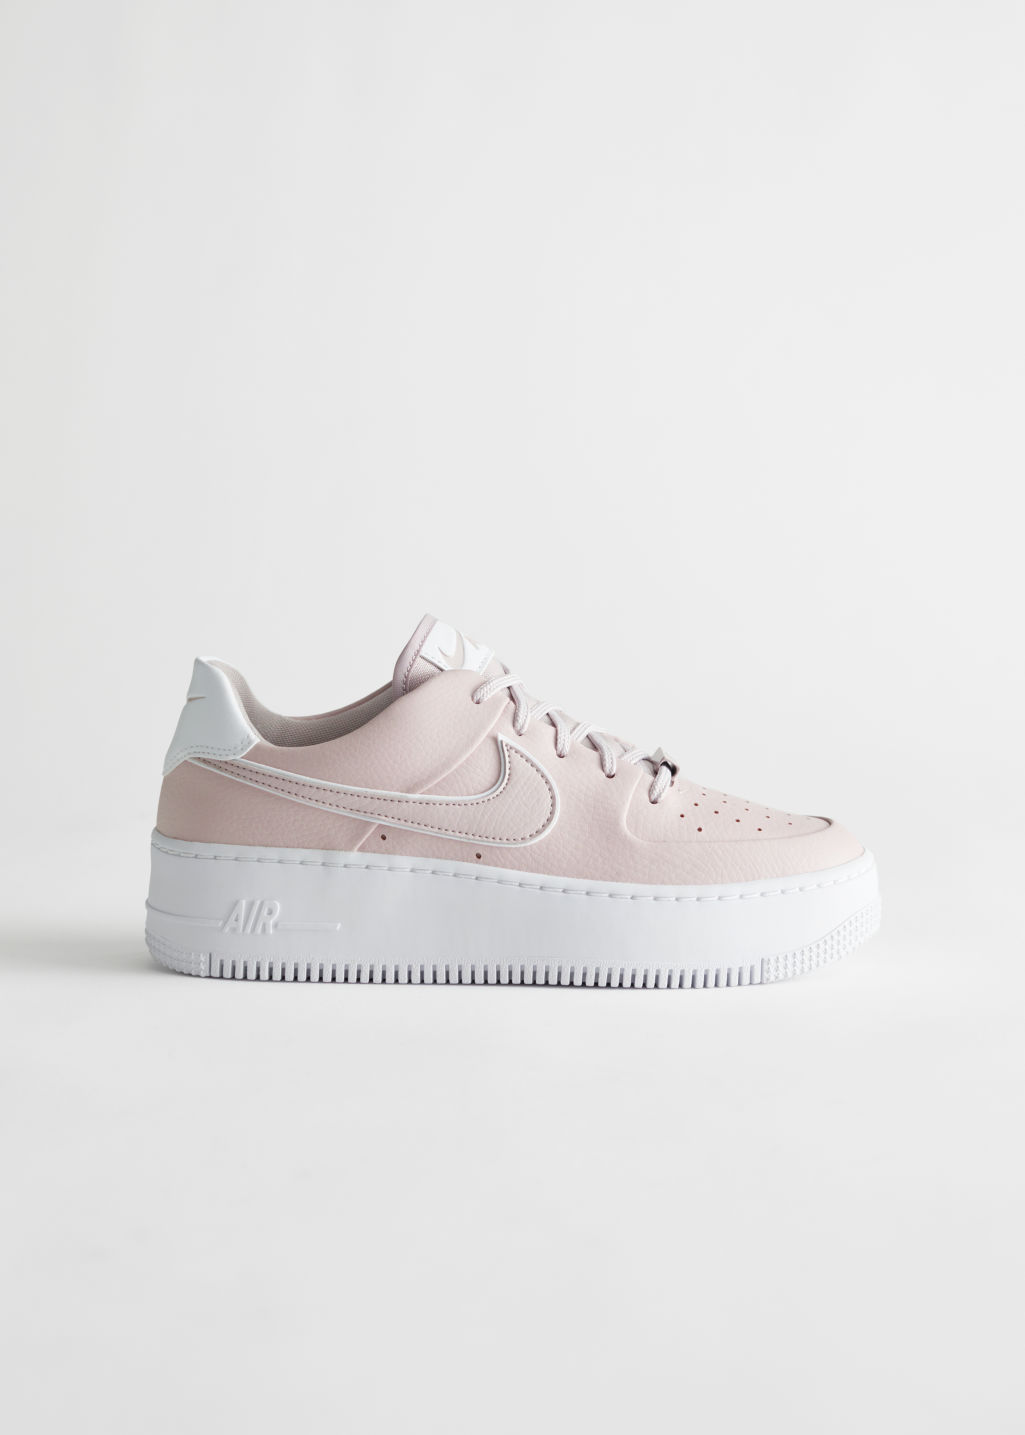 Nike Air Force 1 Sage Low Sneakers - Light Beige - Nike - & Other Stories